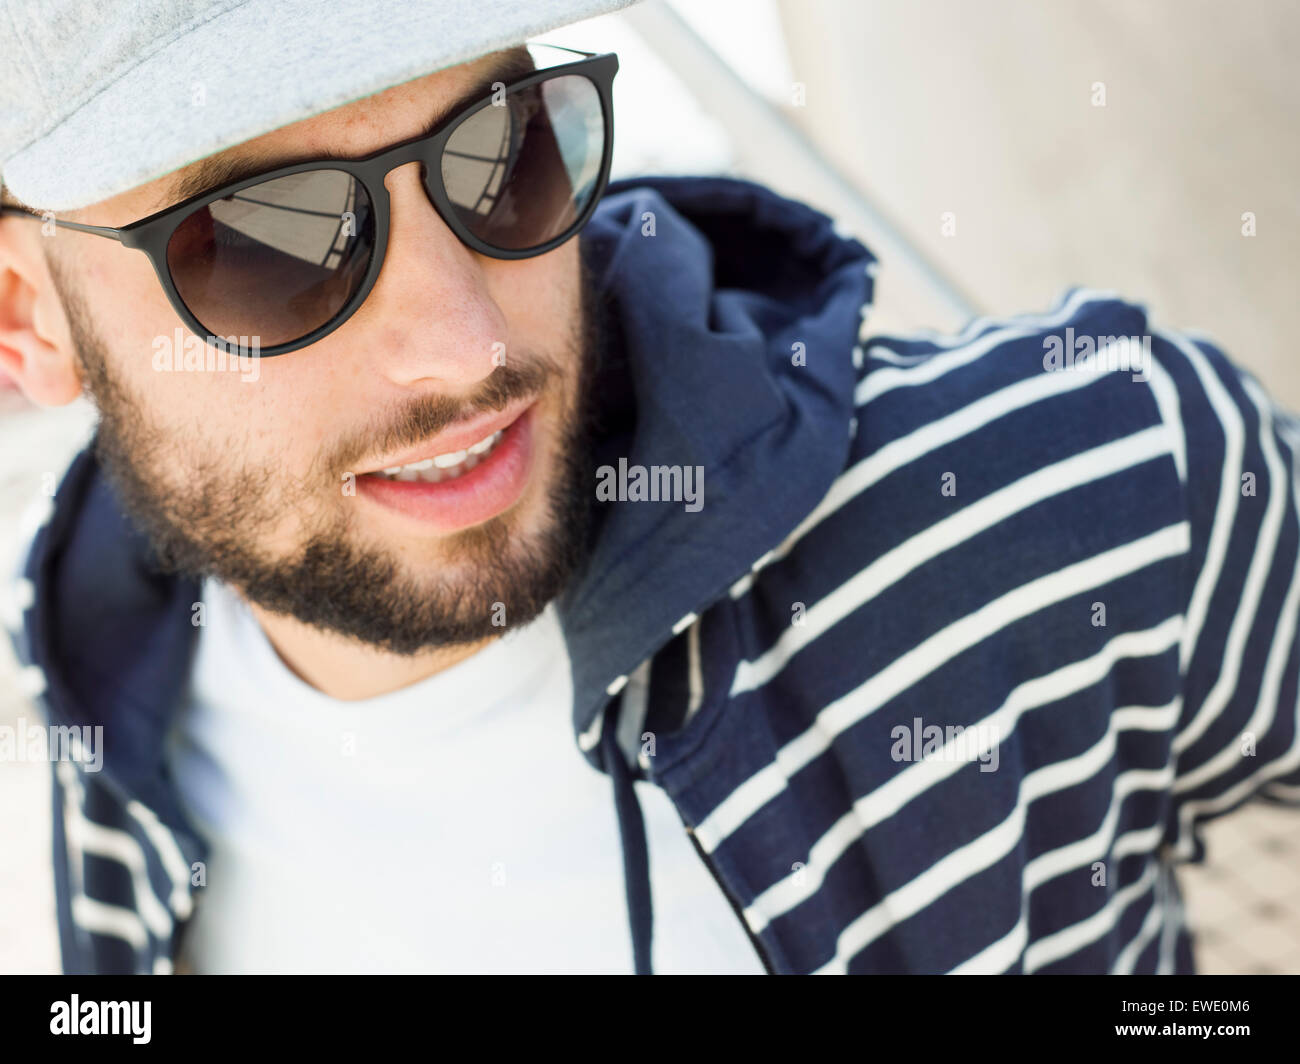 Portrait of a smiling young man wearing sunglasses Stock Photo